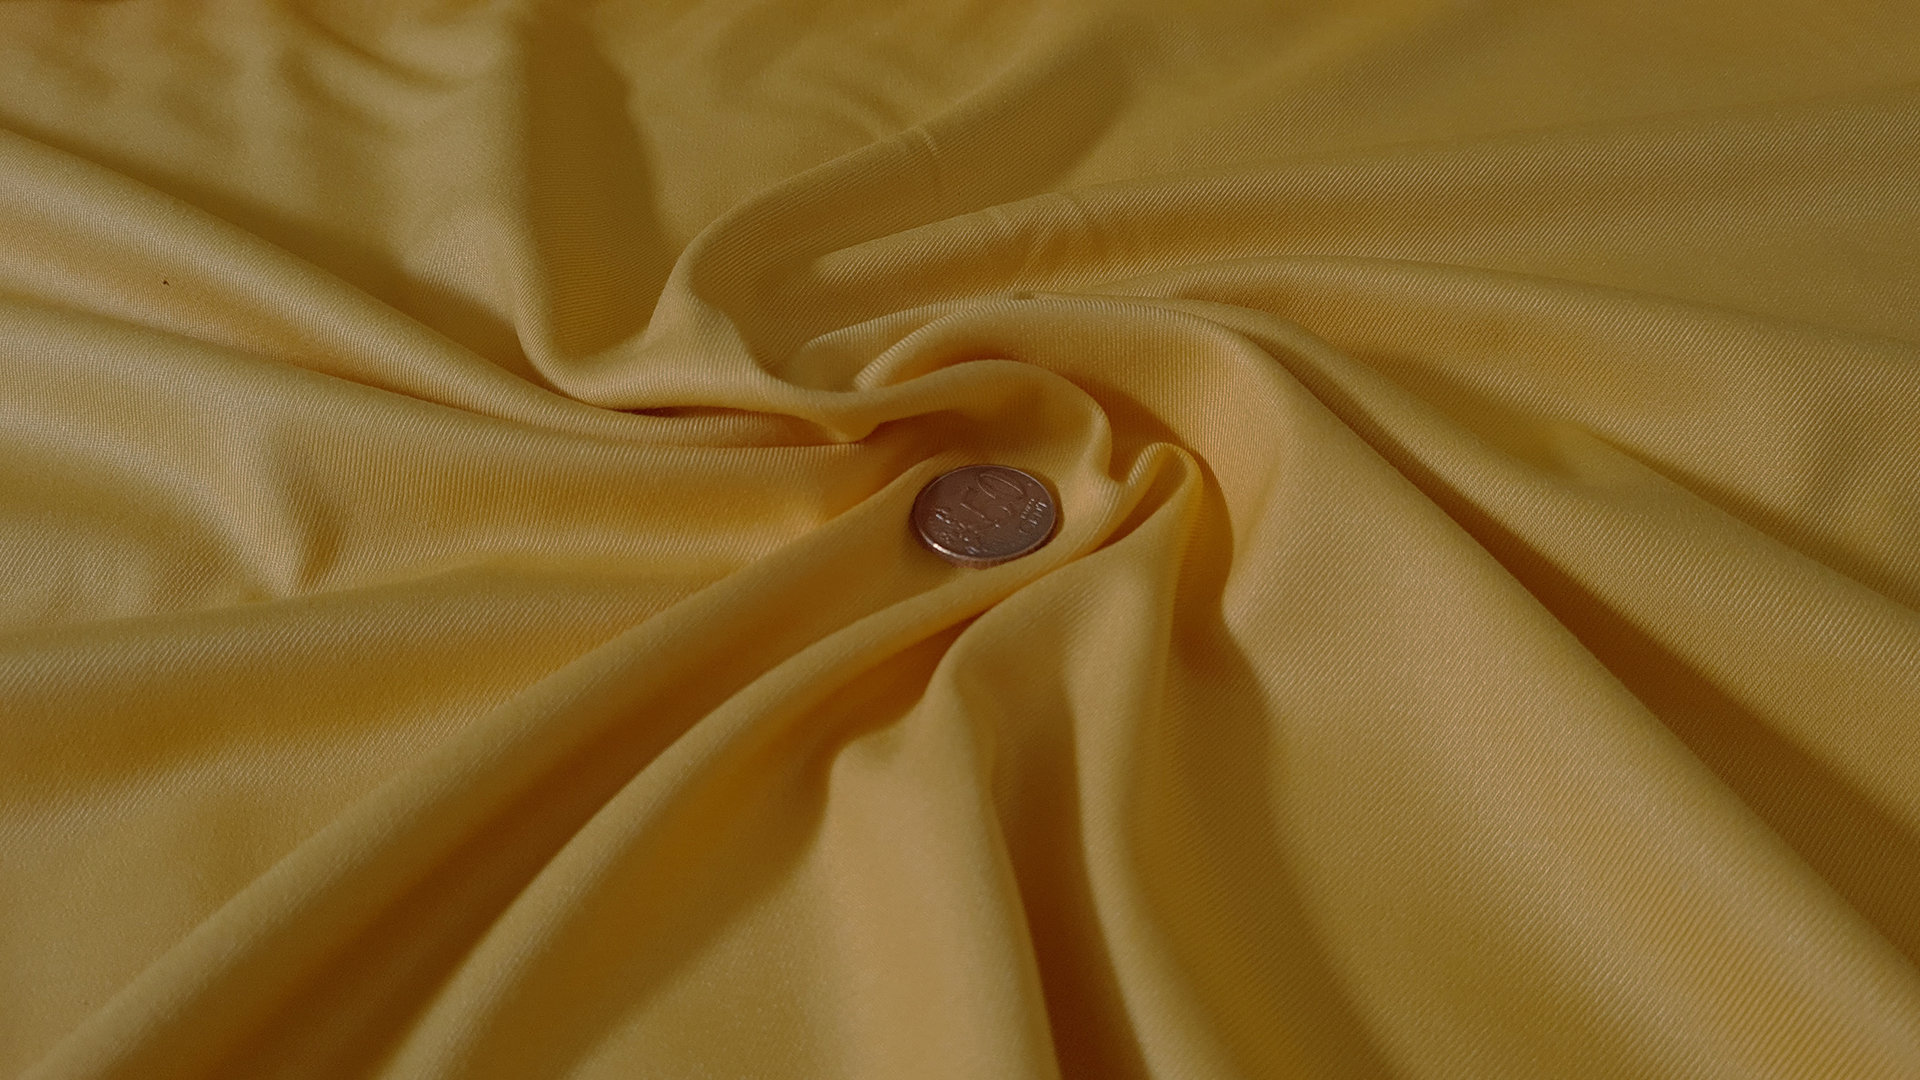 Fabric new wool polyester plain orange crease resistant